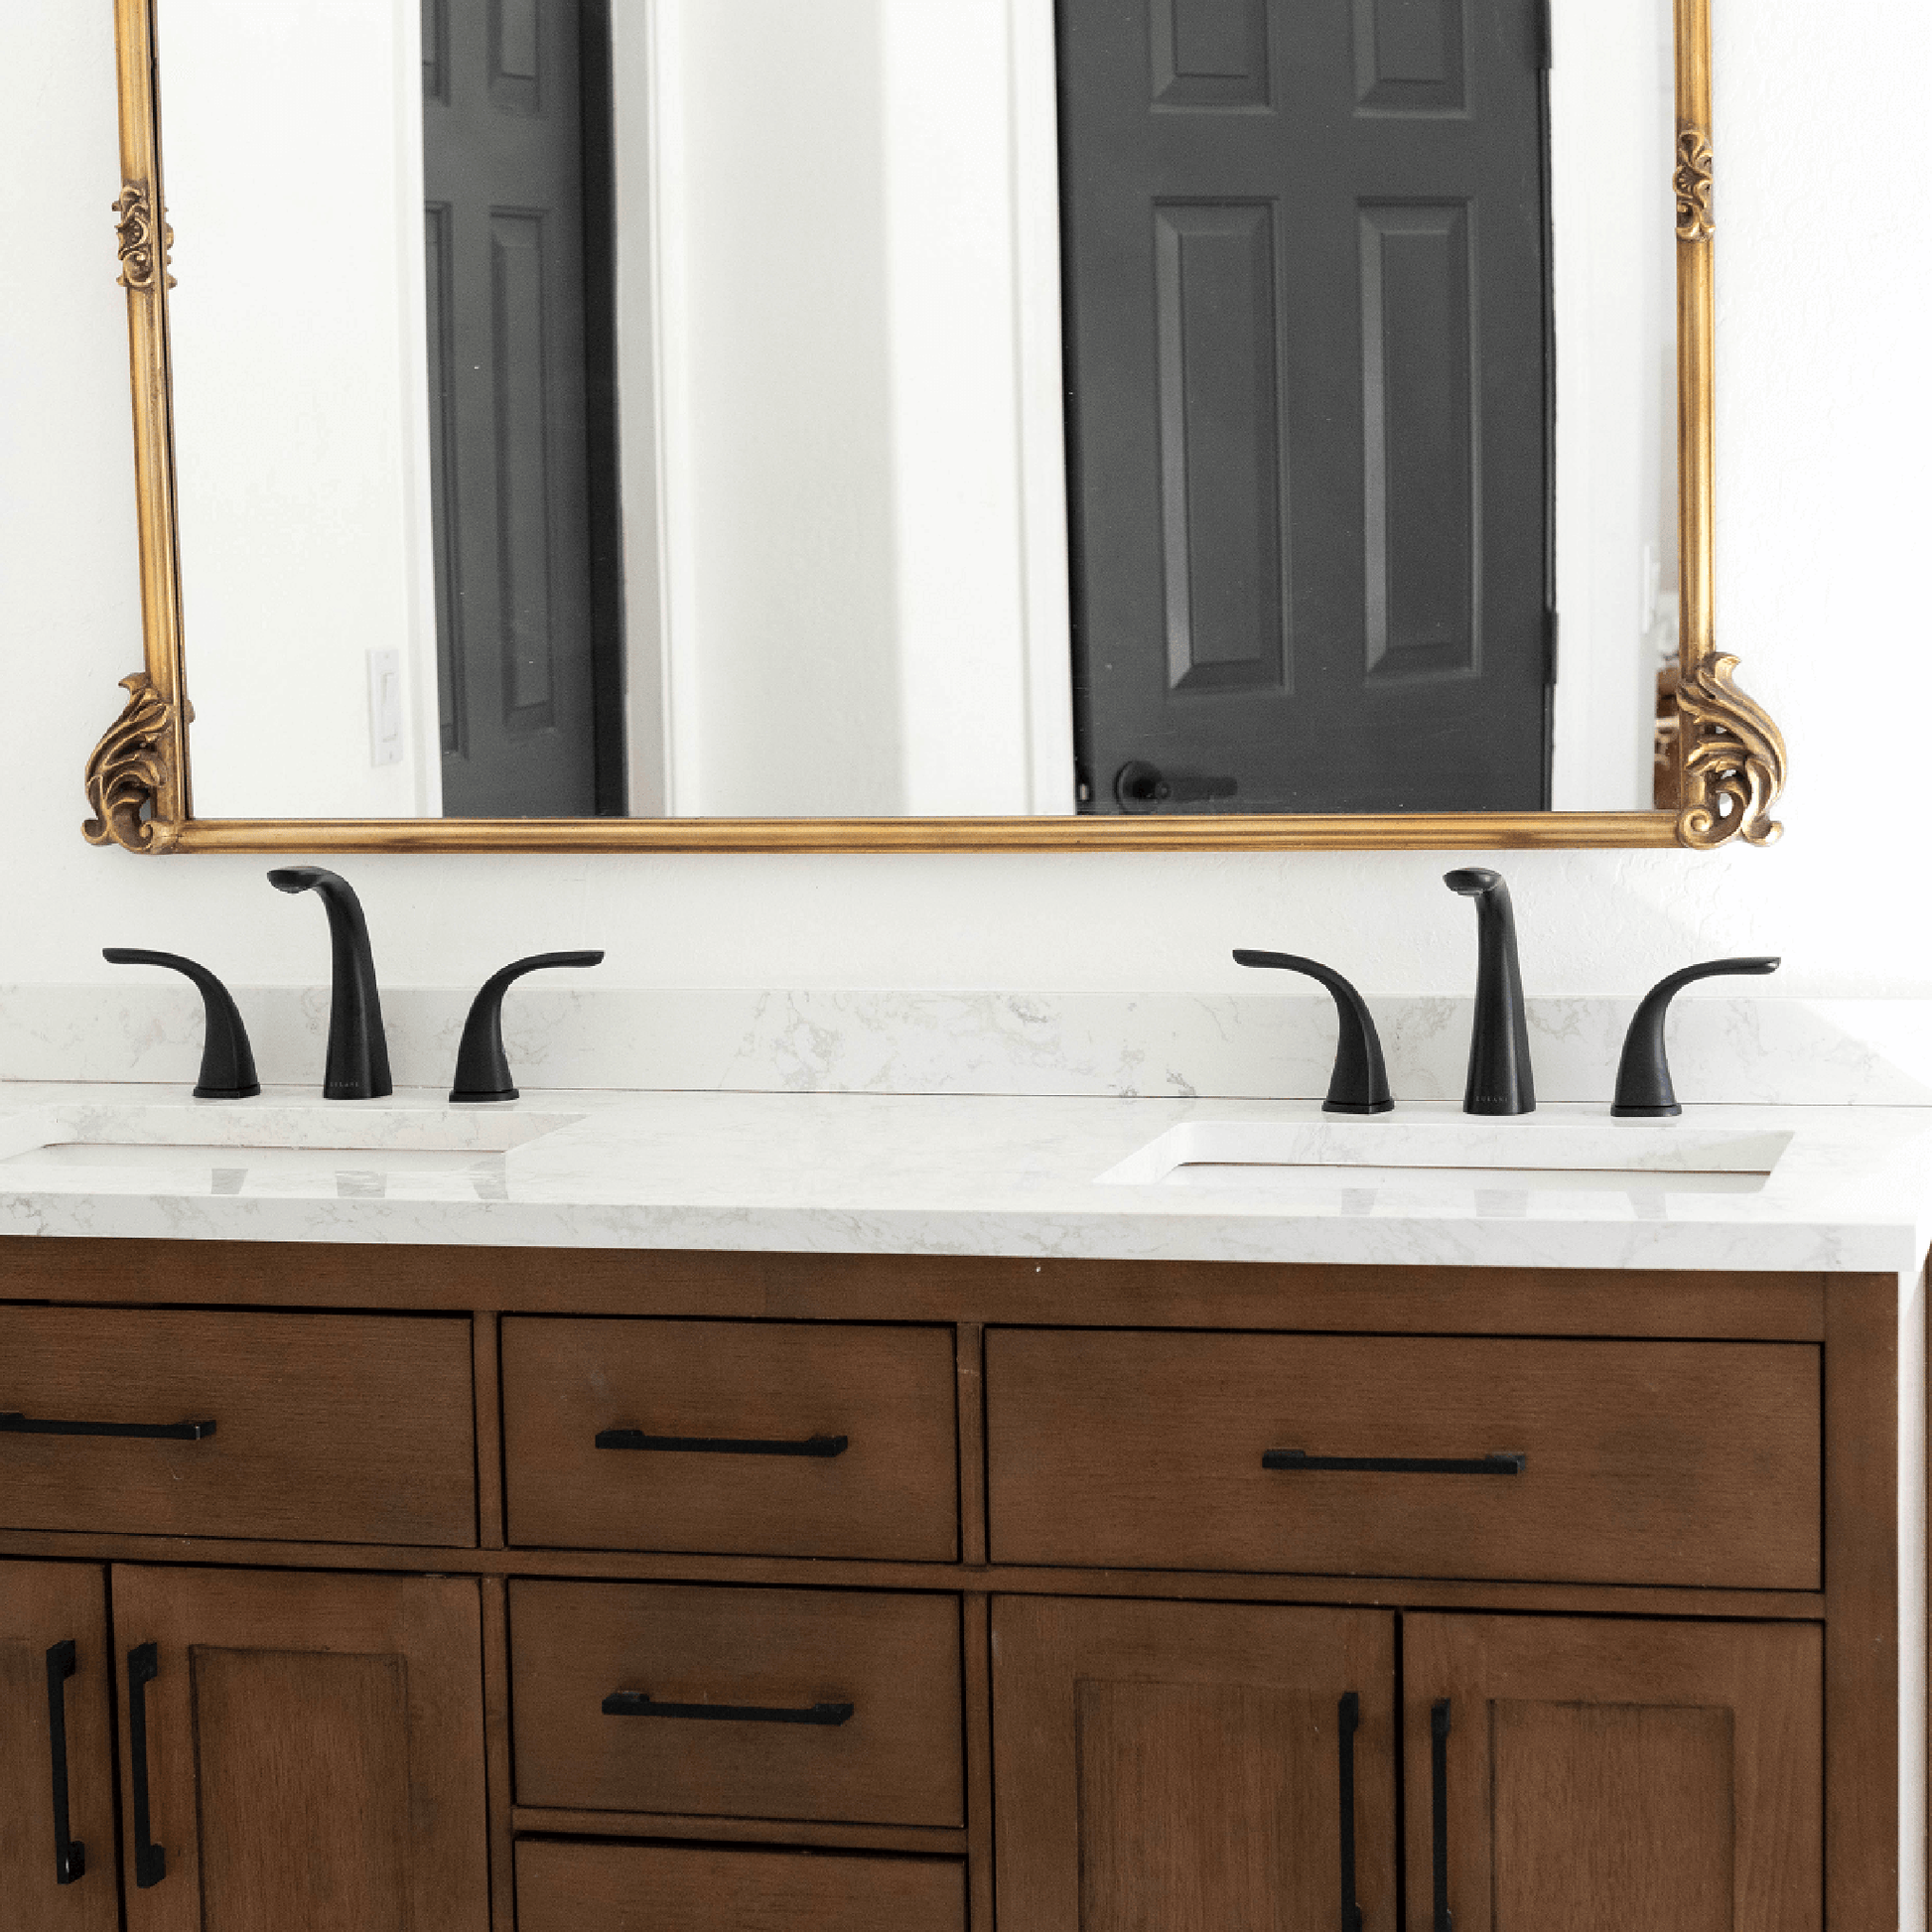 Lulani Kauai Matte Black 1.2 GPM Two Handle Widespread Brass Faucet With Drain Assembly